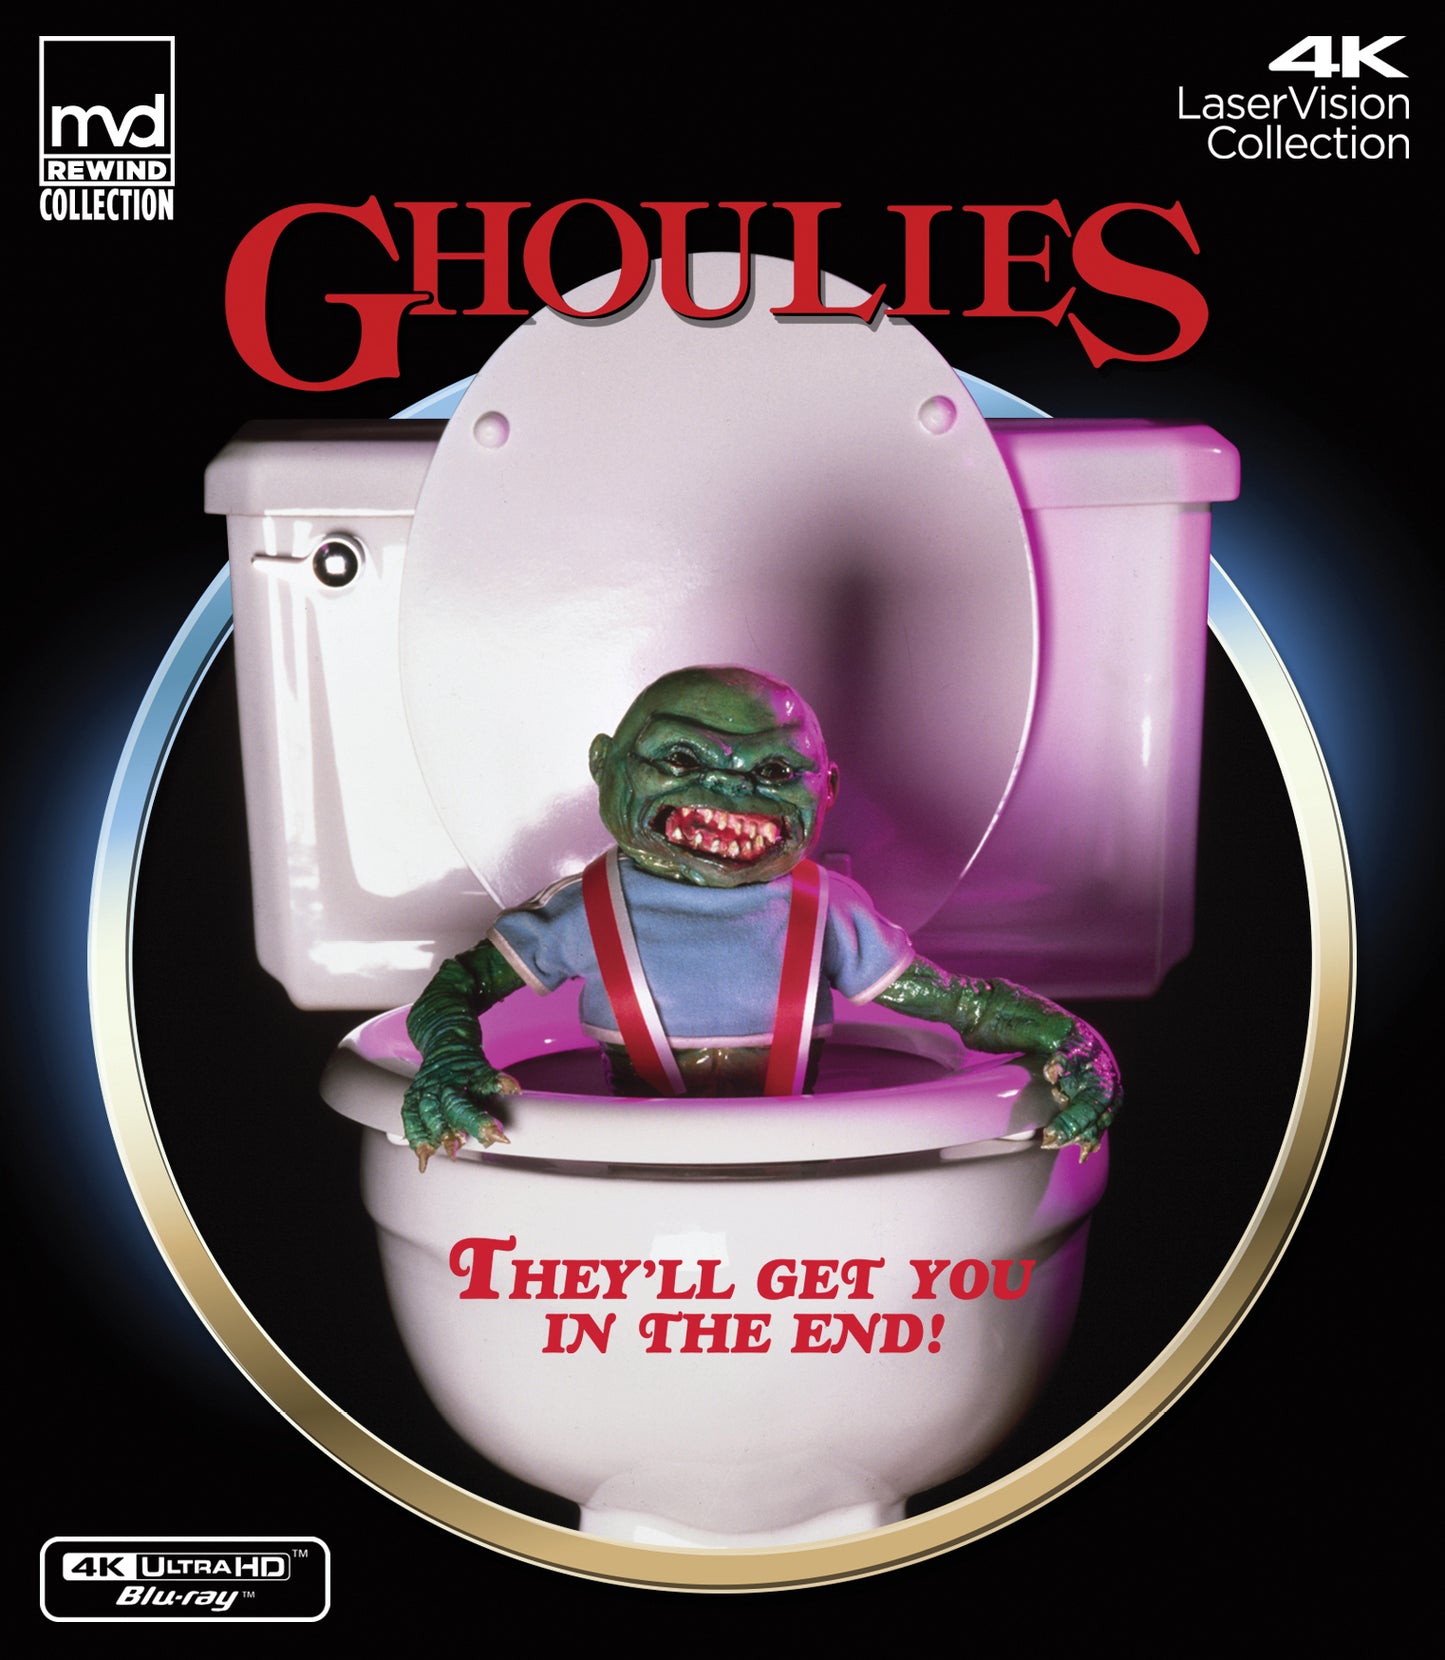 Ghoulies Limited Edition MVD Rewind Collection 4K UHD/Blu-Ray [NEW] [SLIPCOVER]